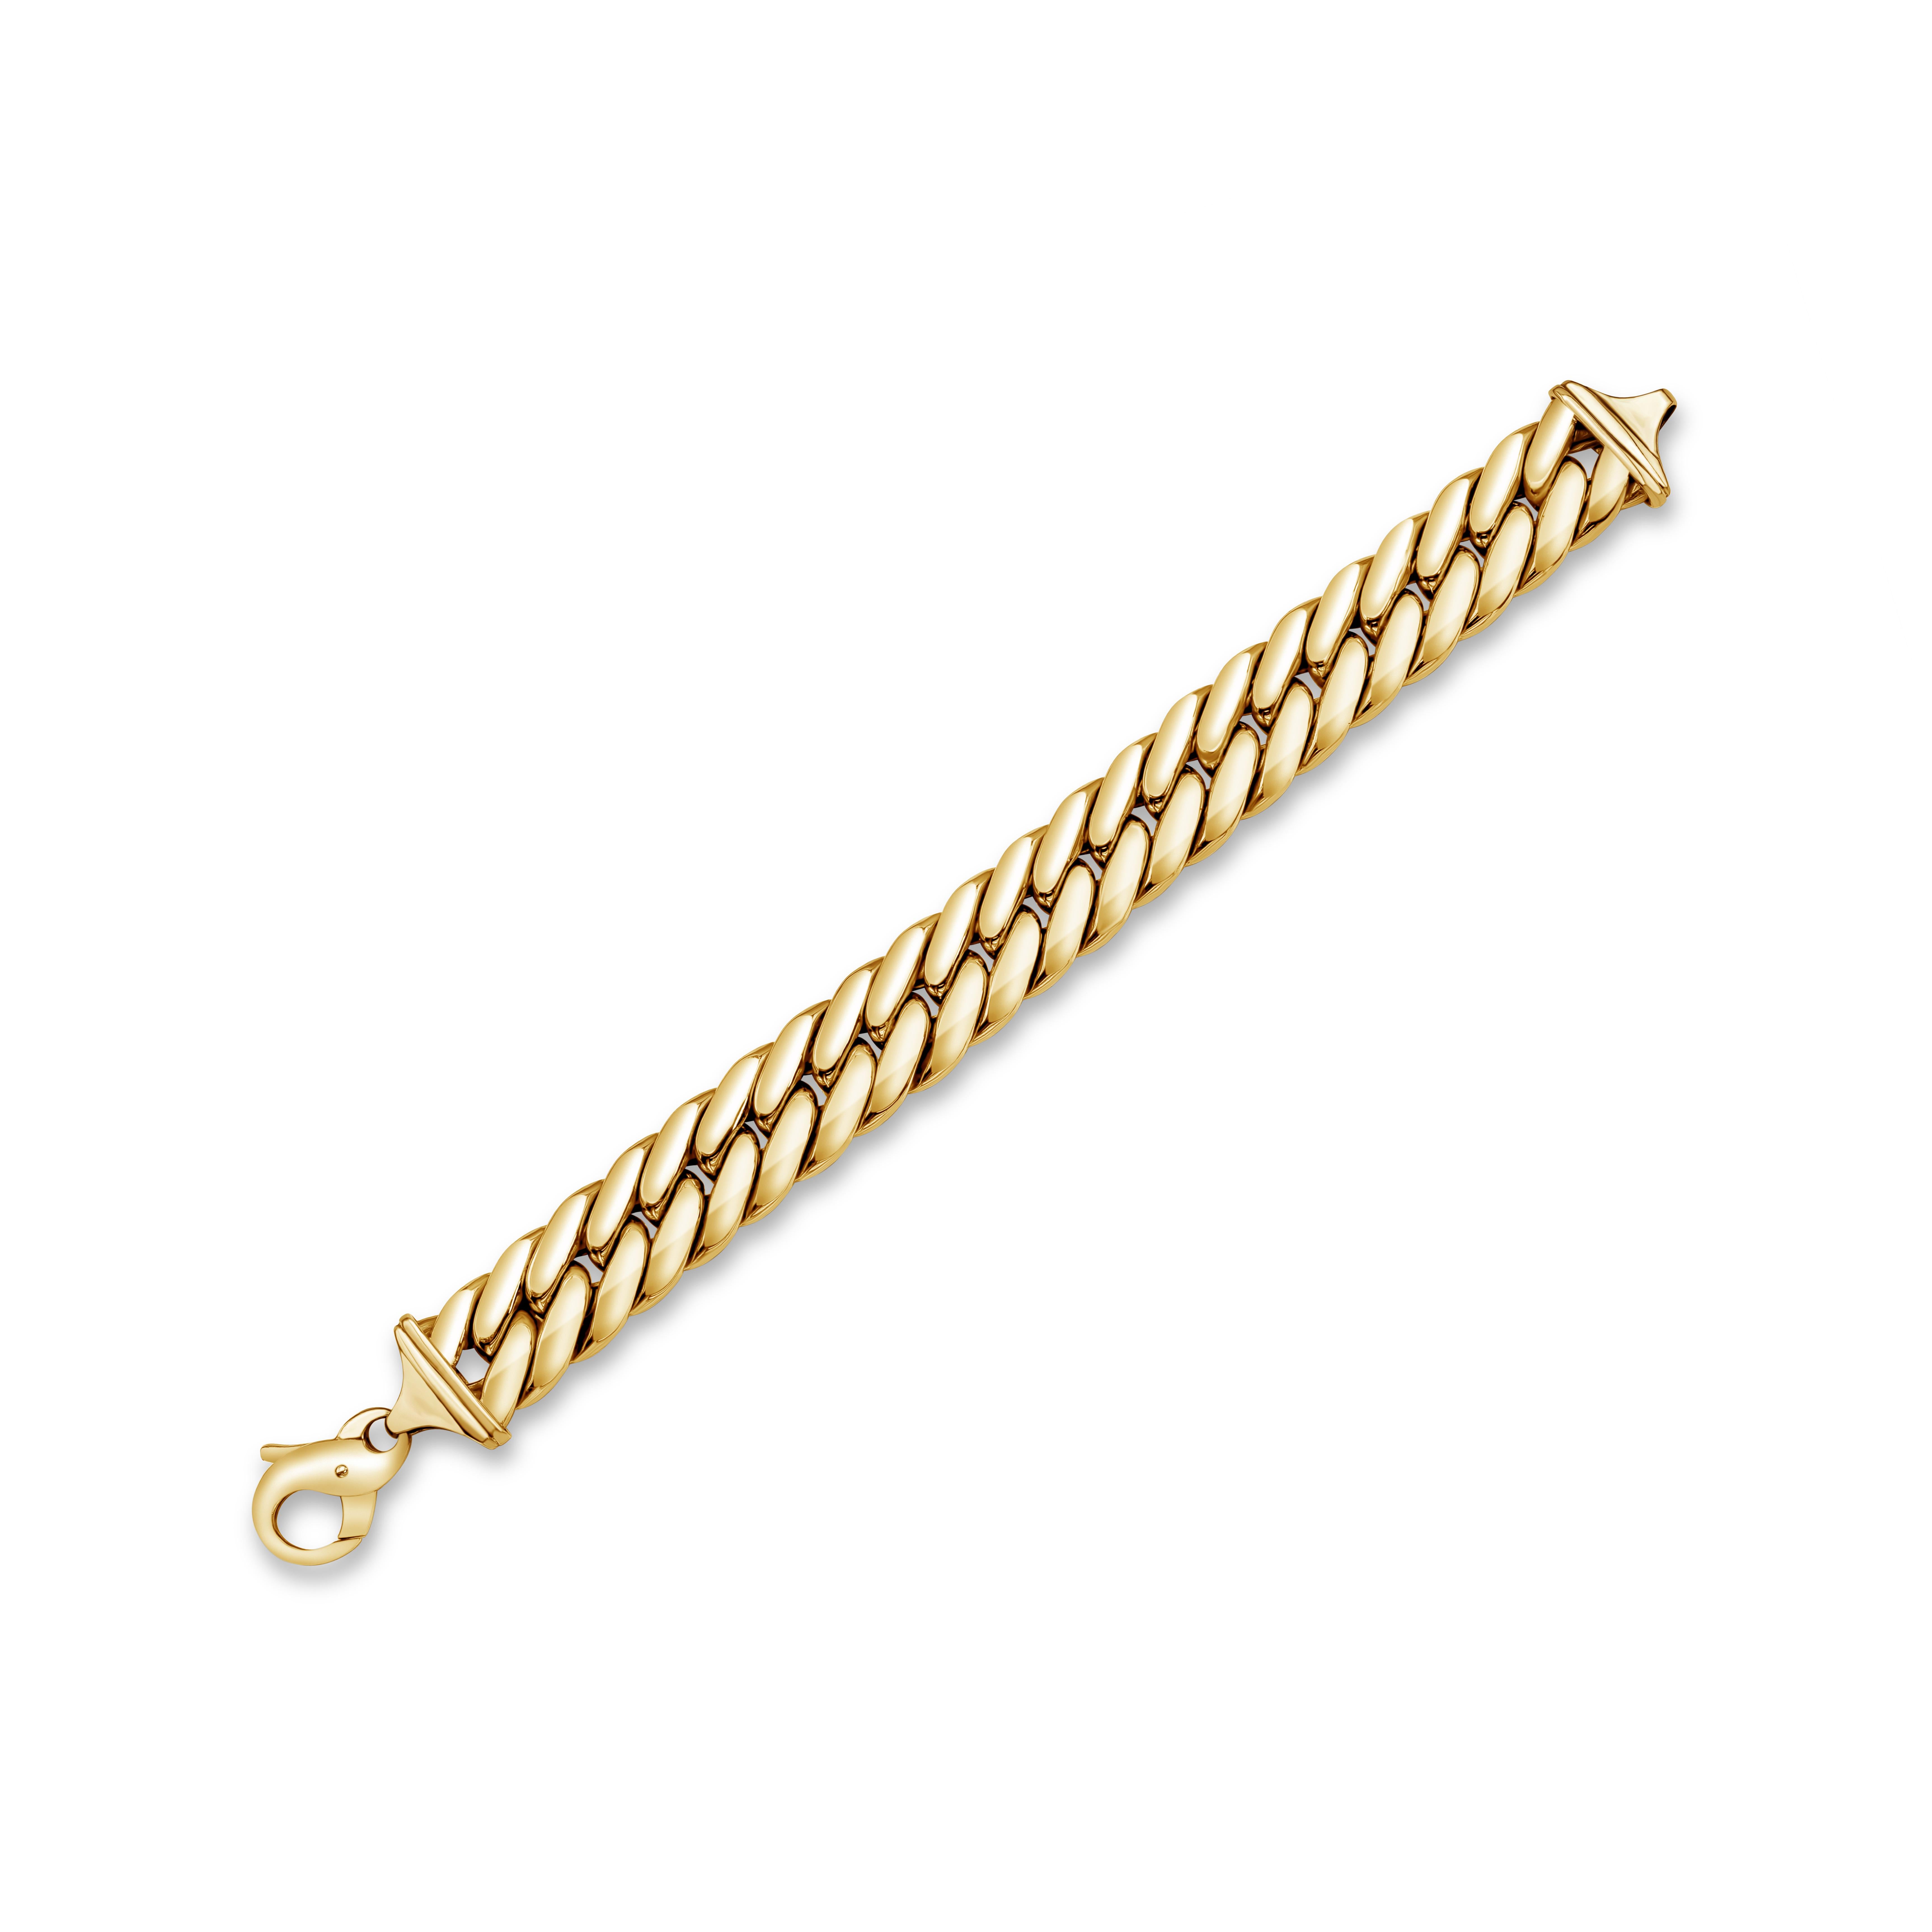 
This 8 inch hollow wide Cuban bracelet design is made in 14 karat yellow gold.
With matching necklace, please check our inventory and contact us for more information.